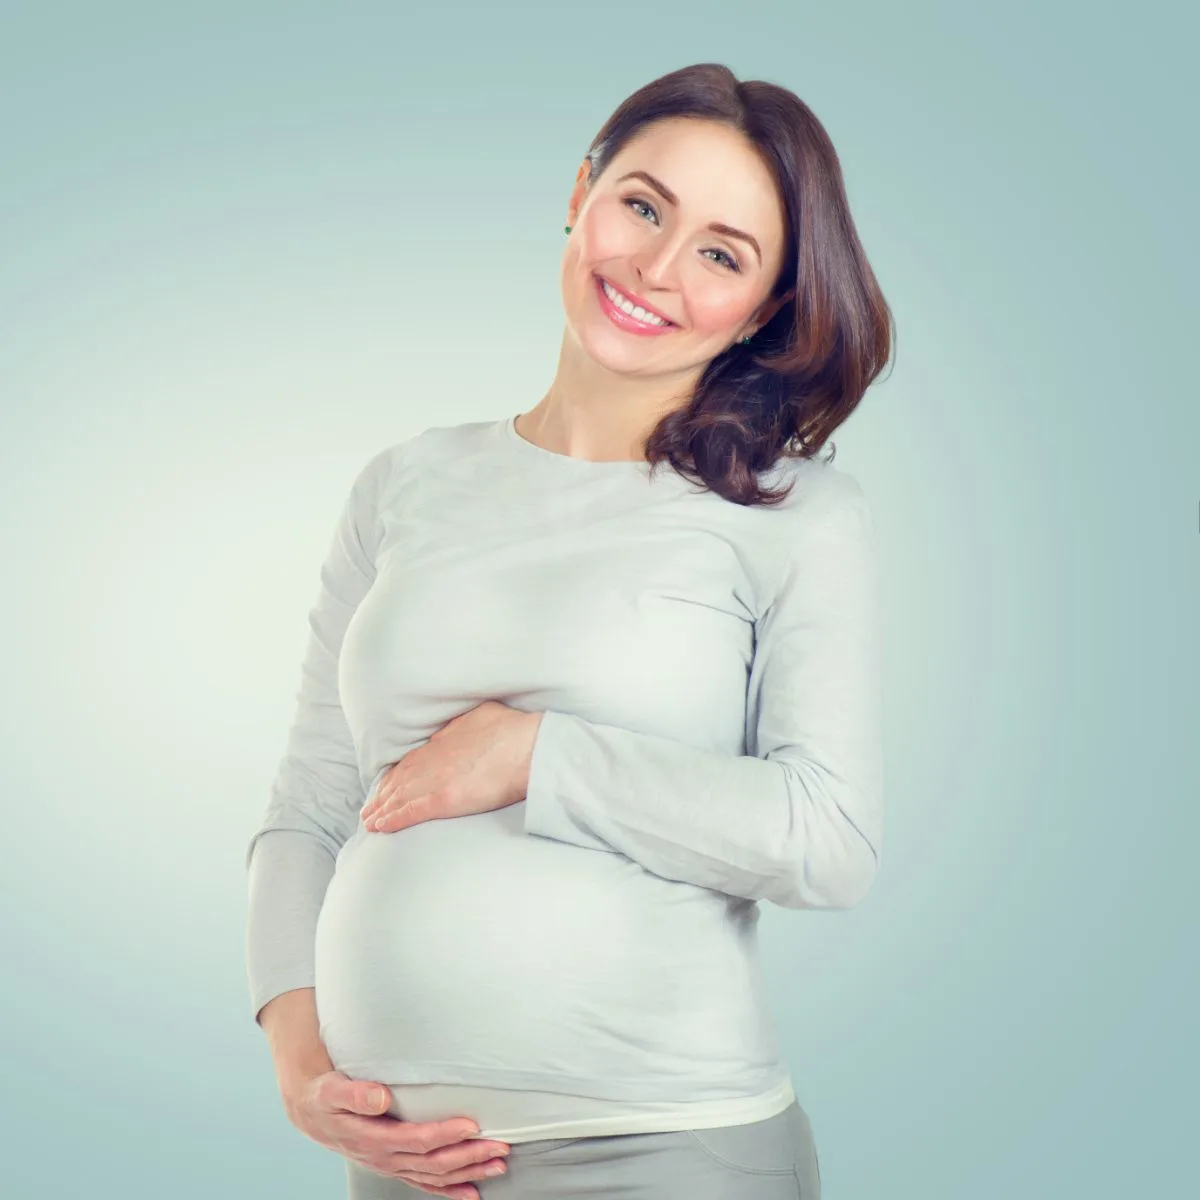 Can you take quercetin if you are pregnant